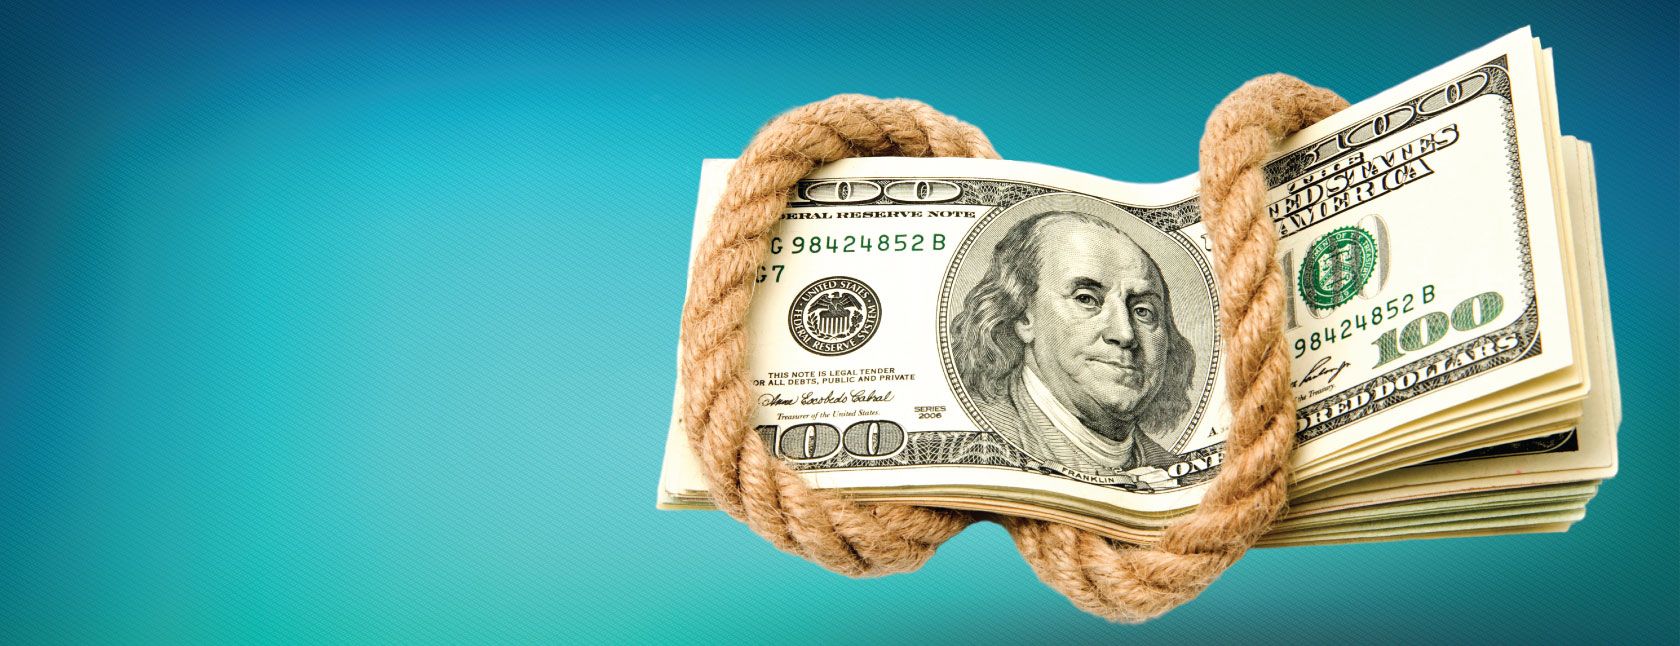 Money tied up with rope